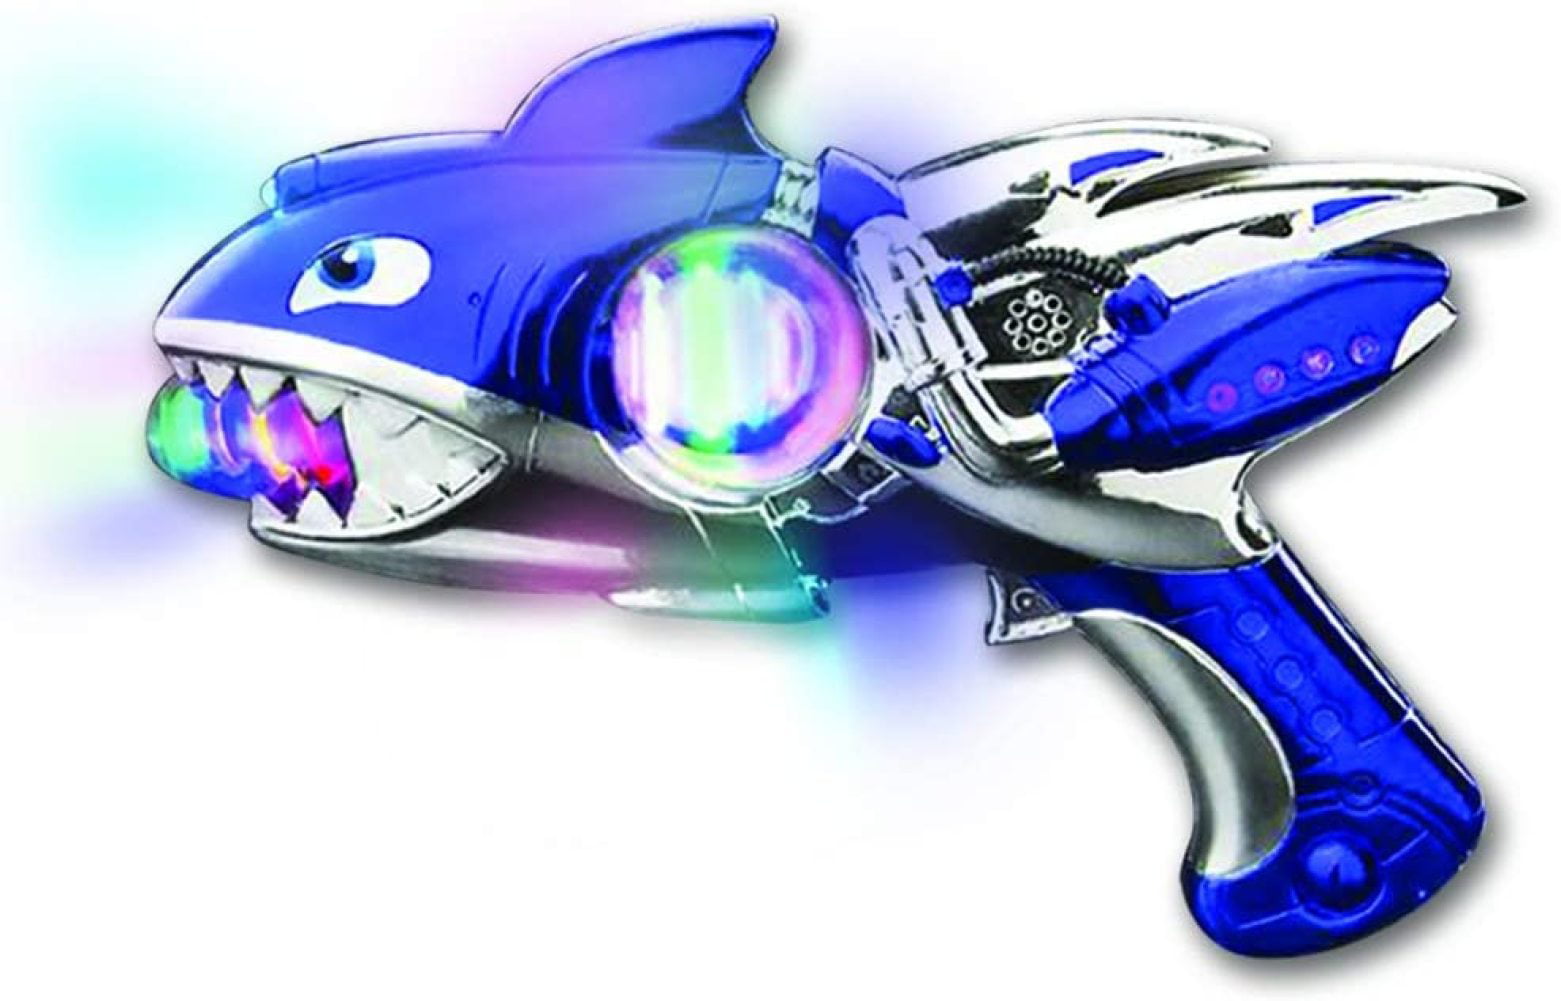 JuIShareE Light Up Super Spinning Shark Blaster, Spinning LED and Cool  Sound Effects, ” Light Up Toy Gun for Kids, Batteries Included, Great  Gift Idea for Boys & Girls 